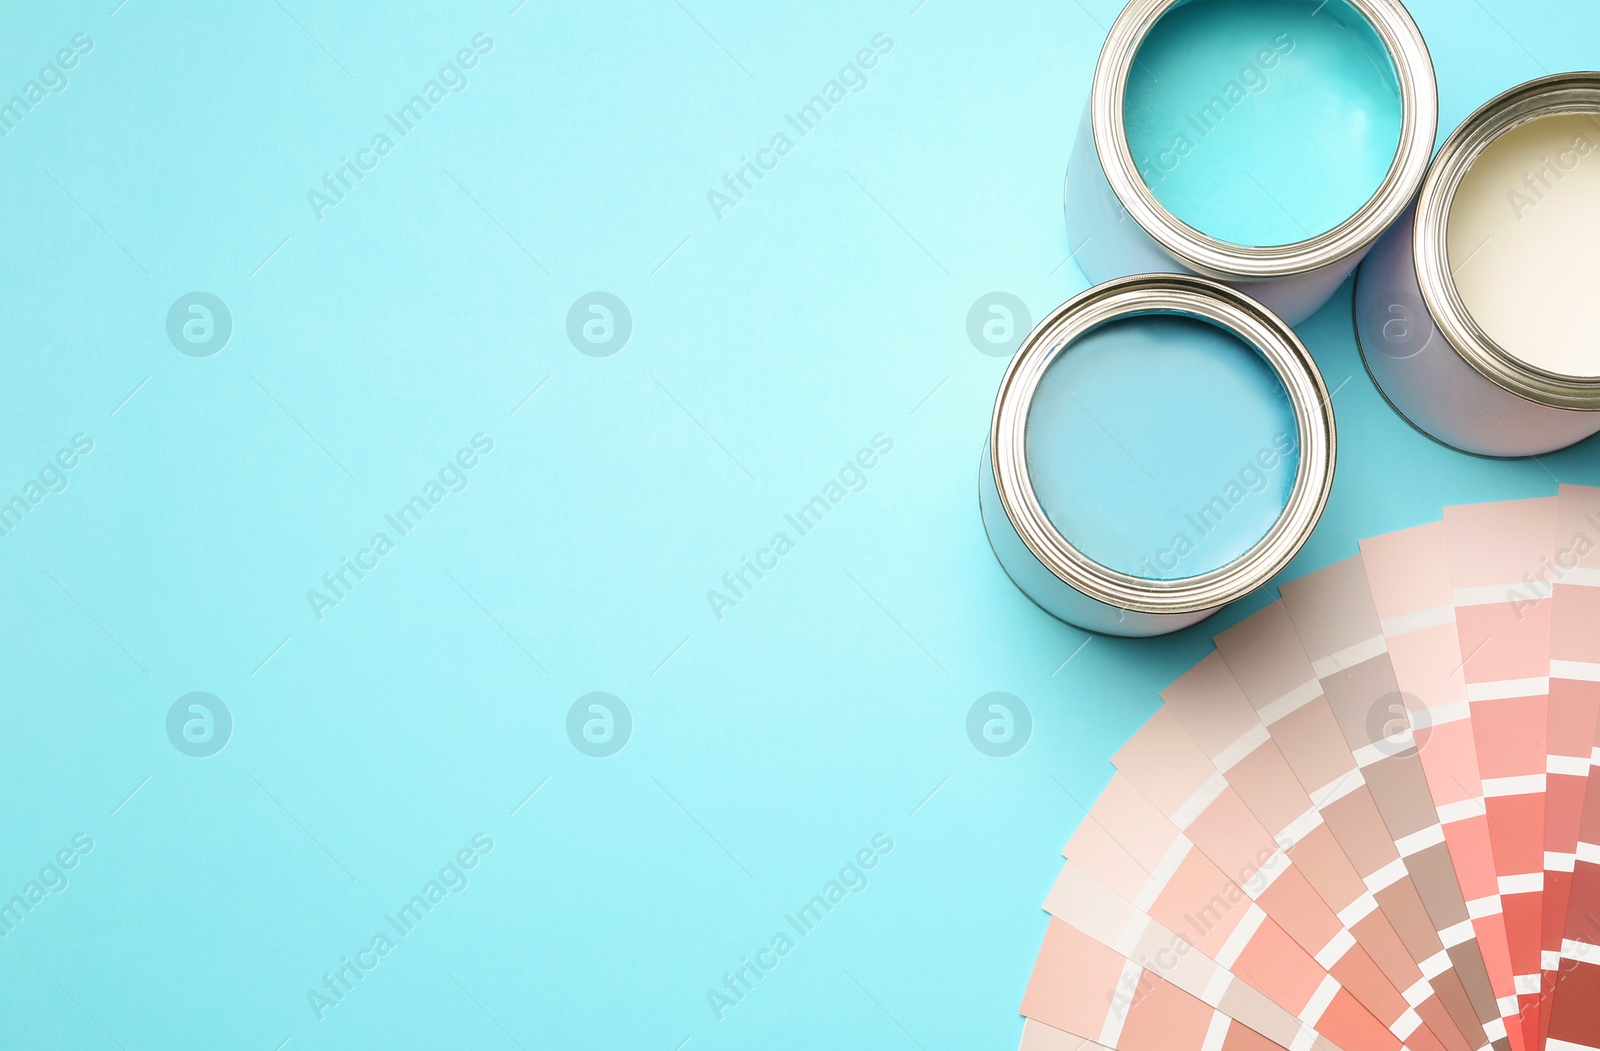 Photo of Paint cans and color palette on blue background, top view. Space for text